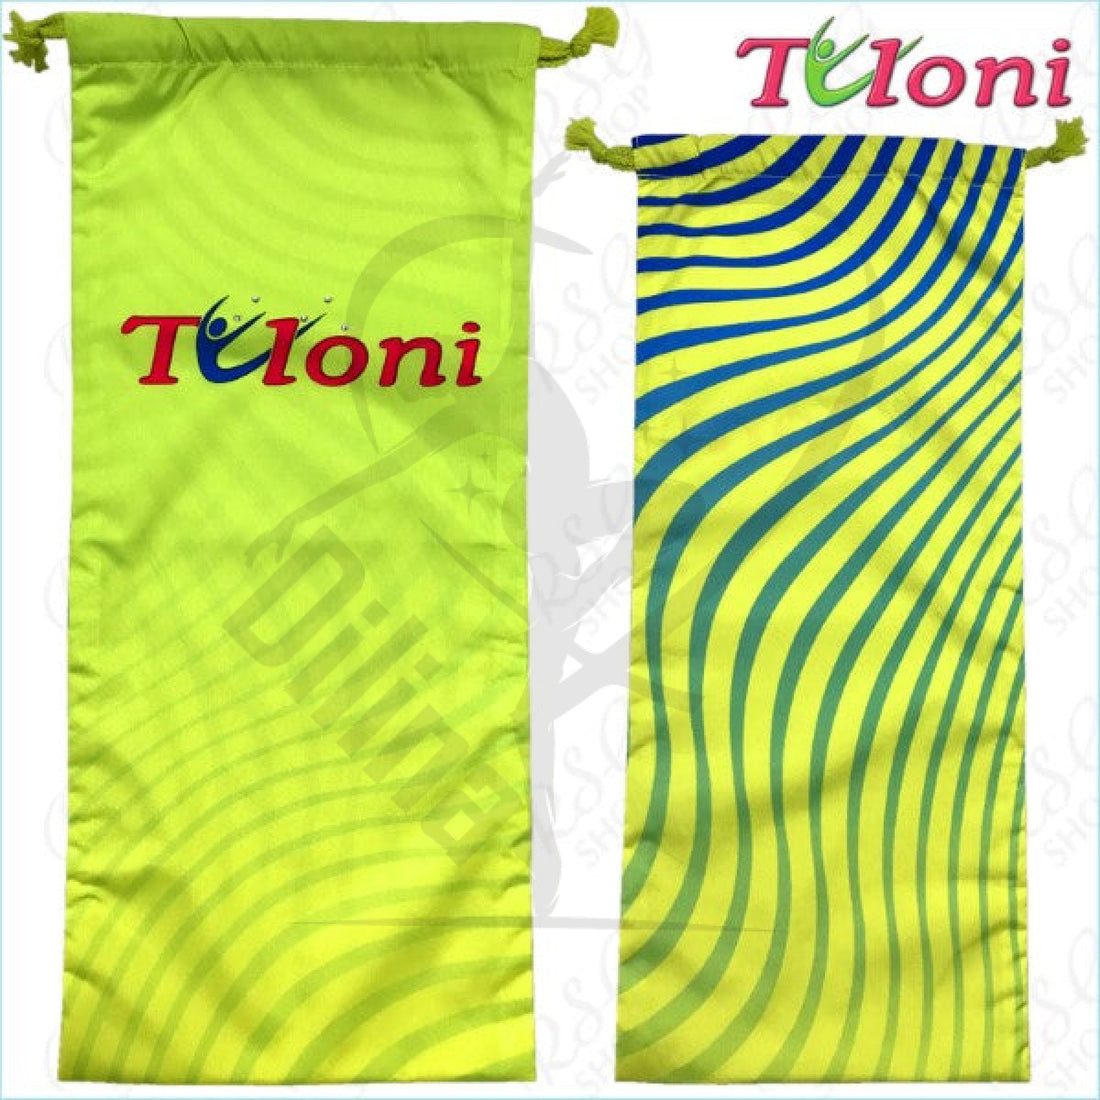 Tuloni Clubs Holder Yellow X Blue Holders